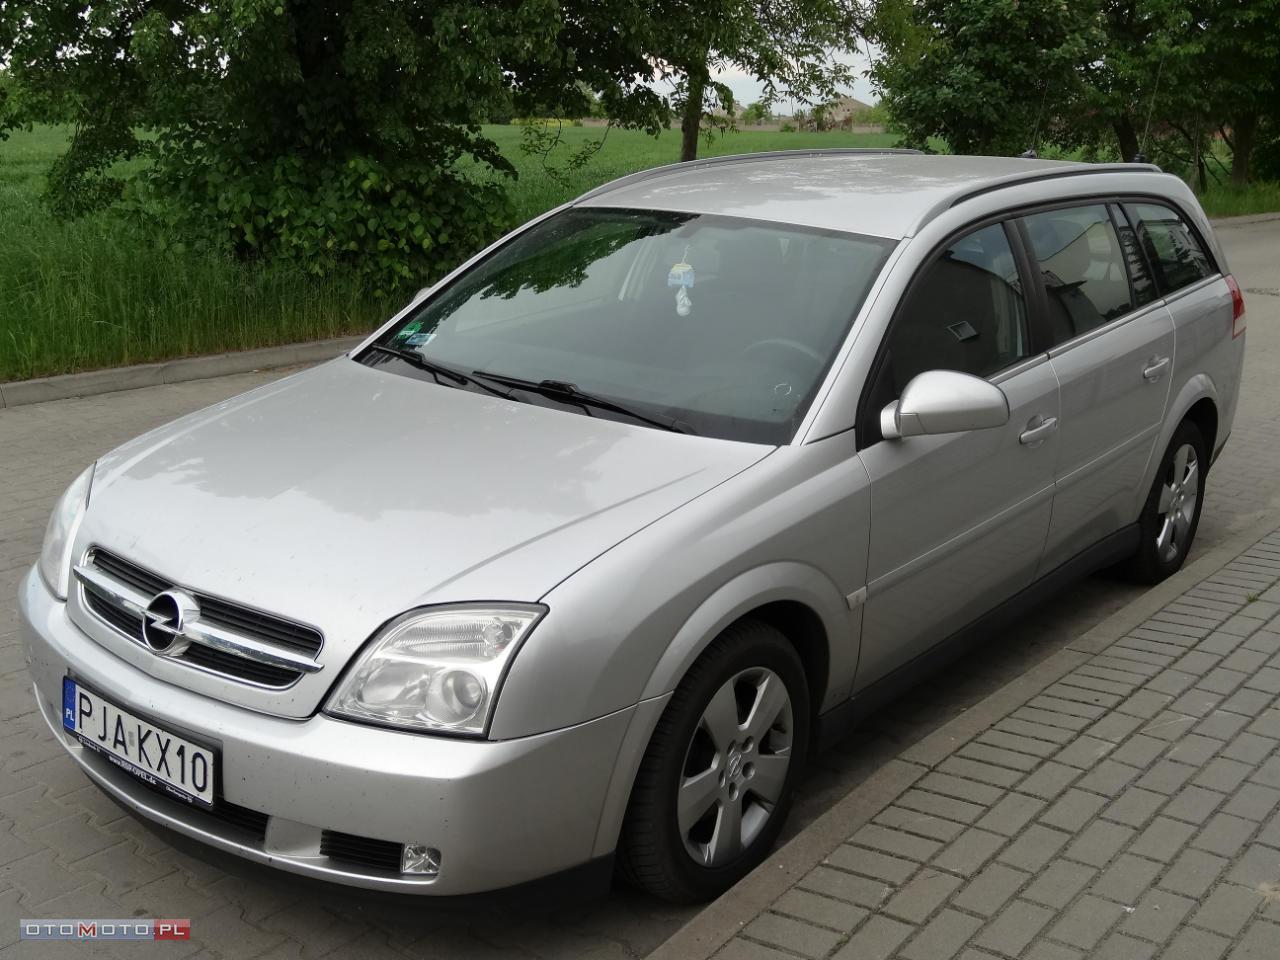 Opel Vectra 1.9 120 PS BEZWYPADKOWY